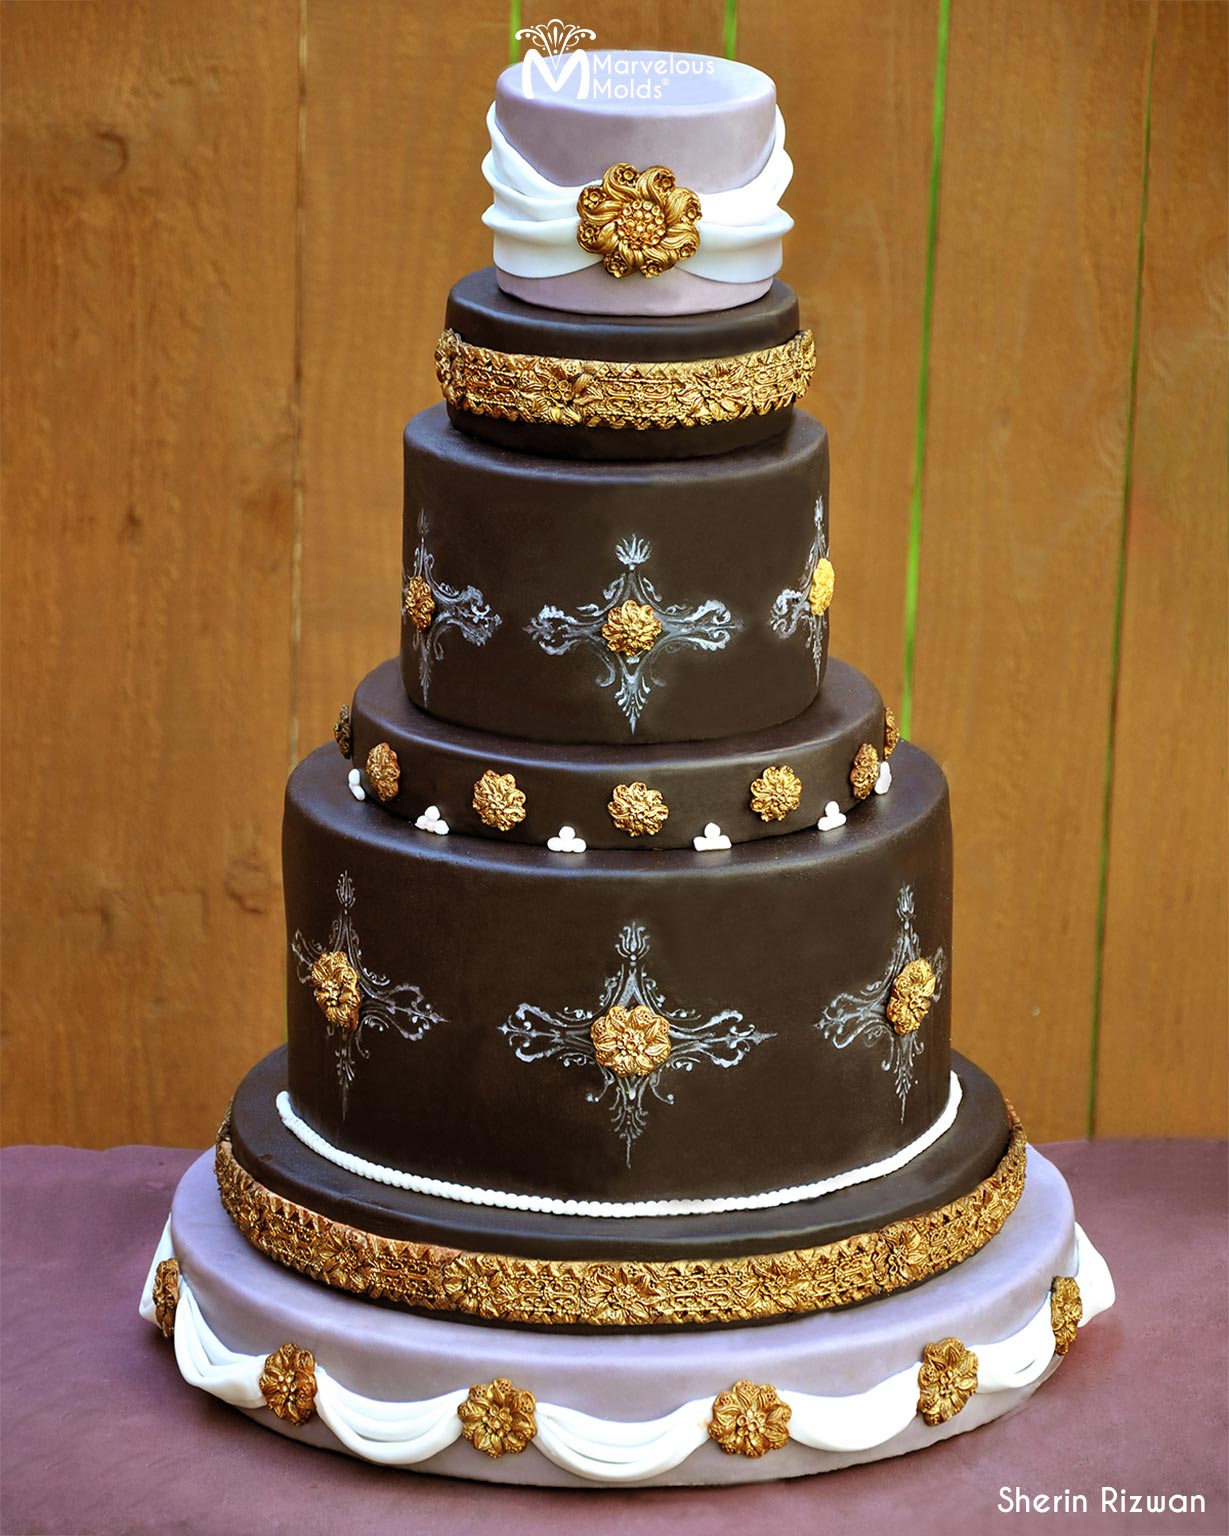 16 Small Wedding Cake Ideas: One-Tier and Two-Tier Designs You'll Love